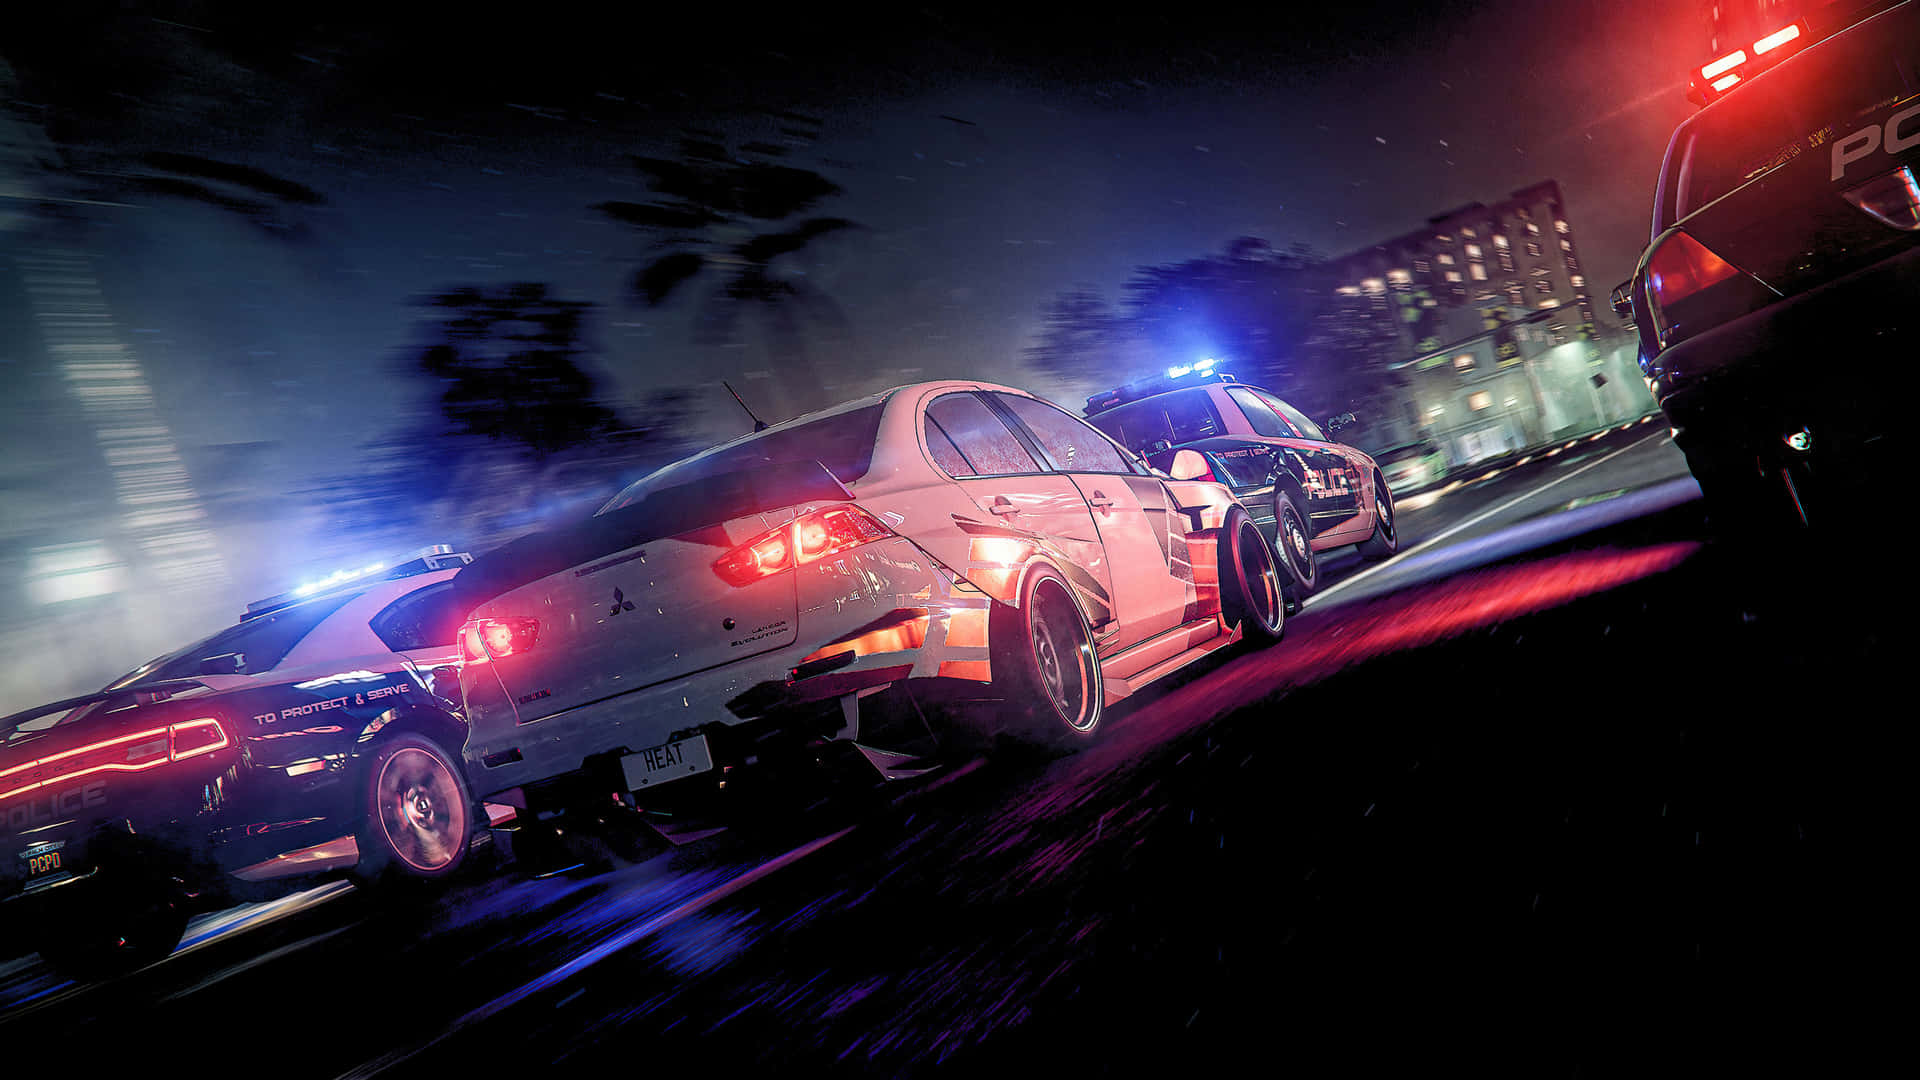 High Speed Police Chaseat Night Wallpaper